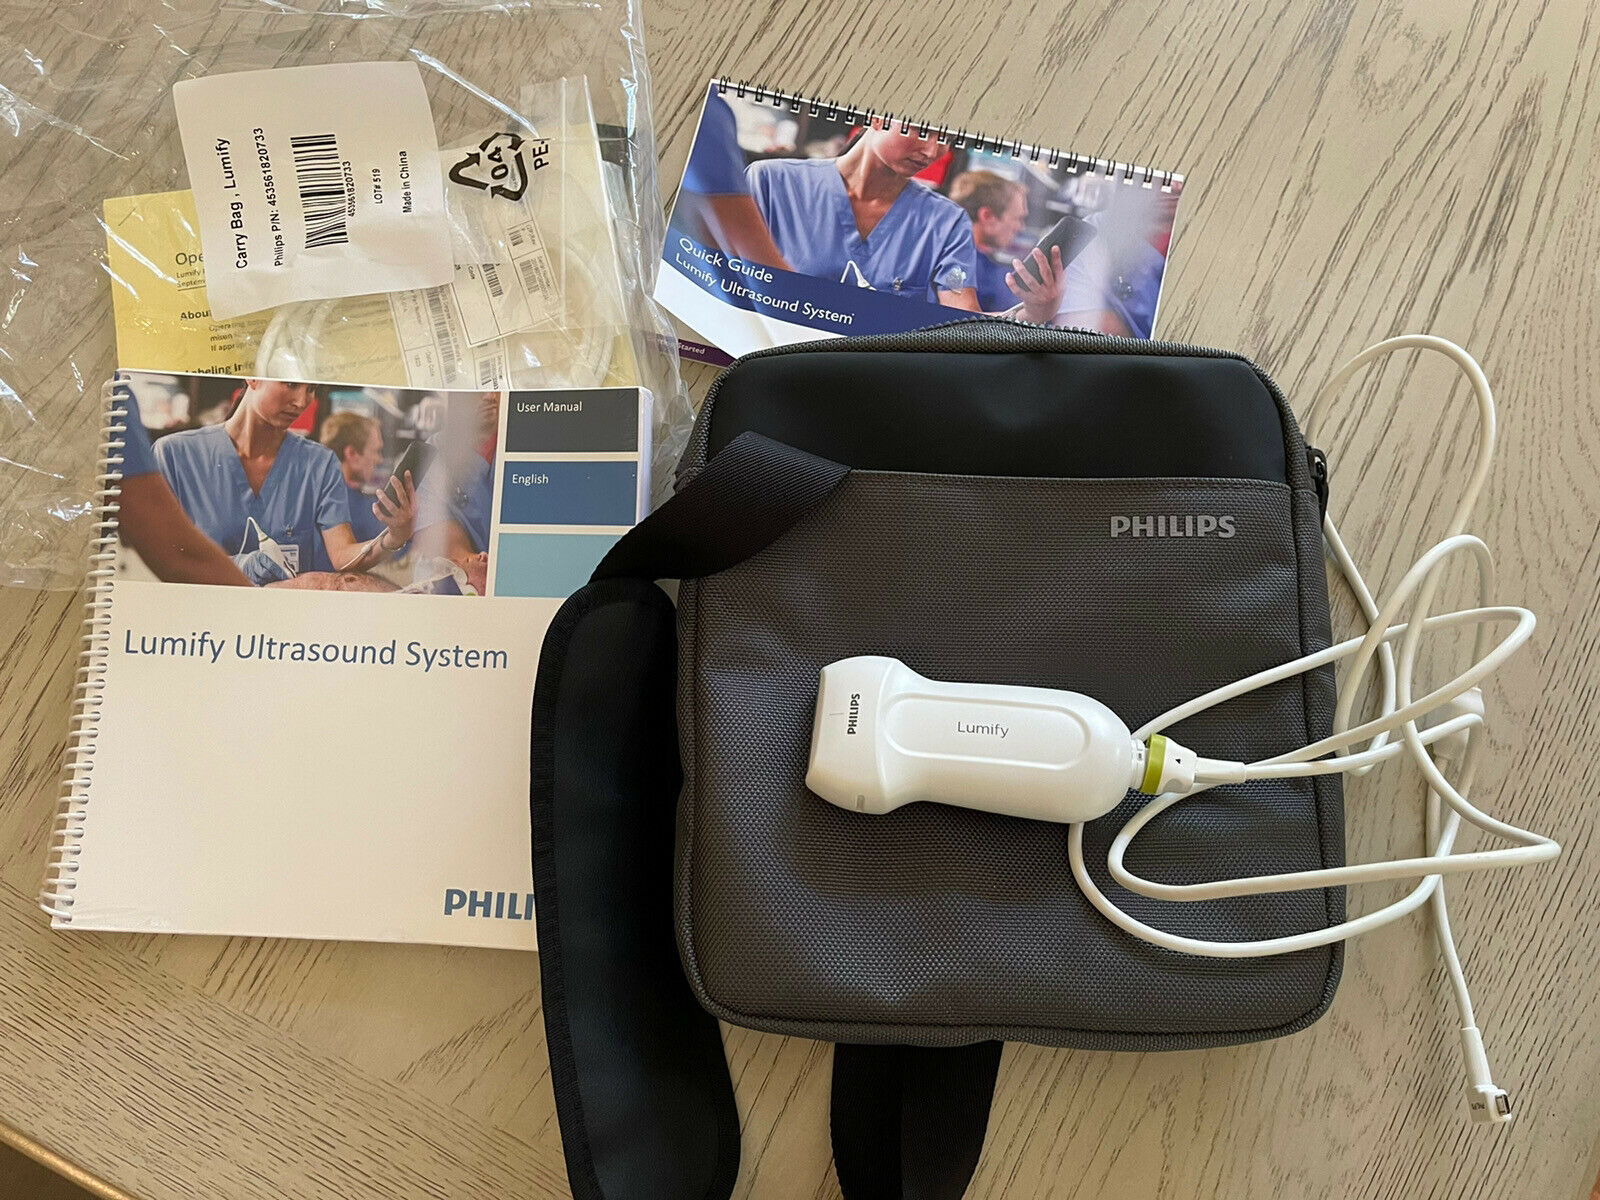 Philips Lumify used portable ultrasound machine and tablet. DIAGNOSTIC ULTRASOUND MACHINES FOR SALE